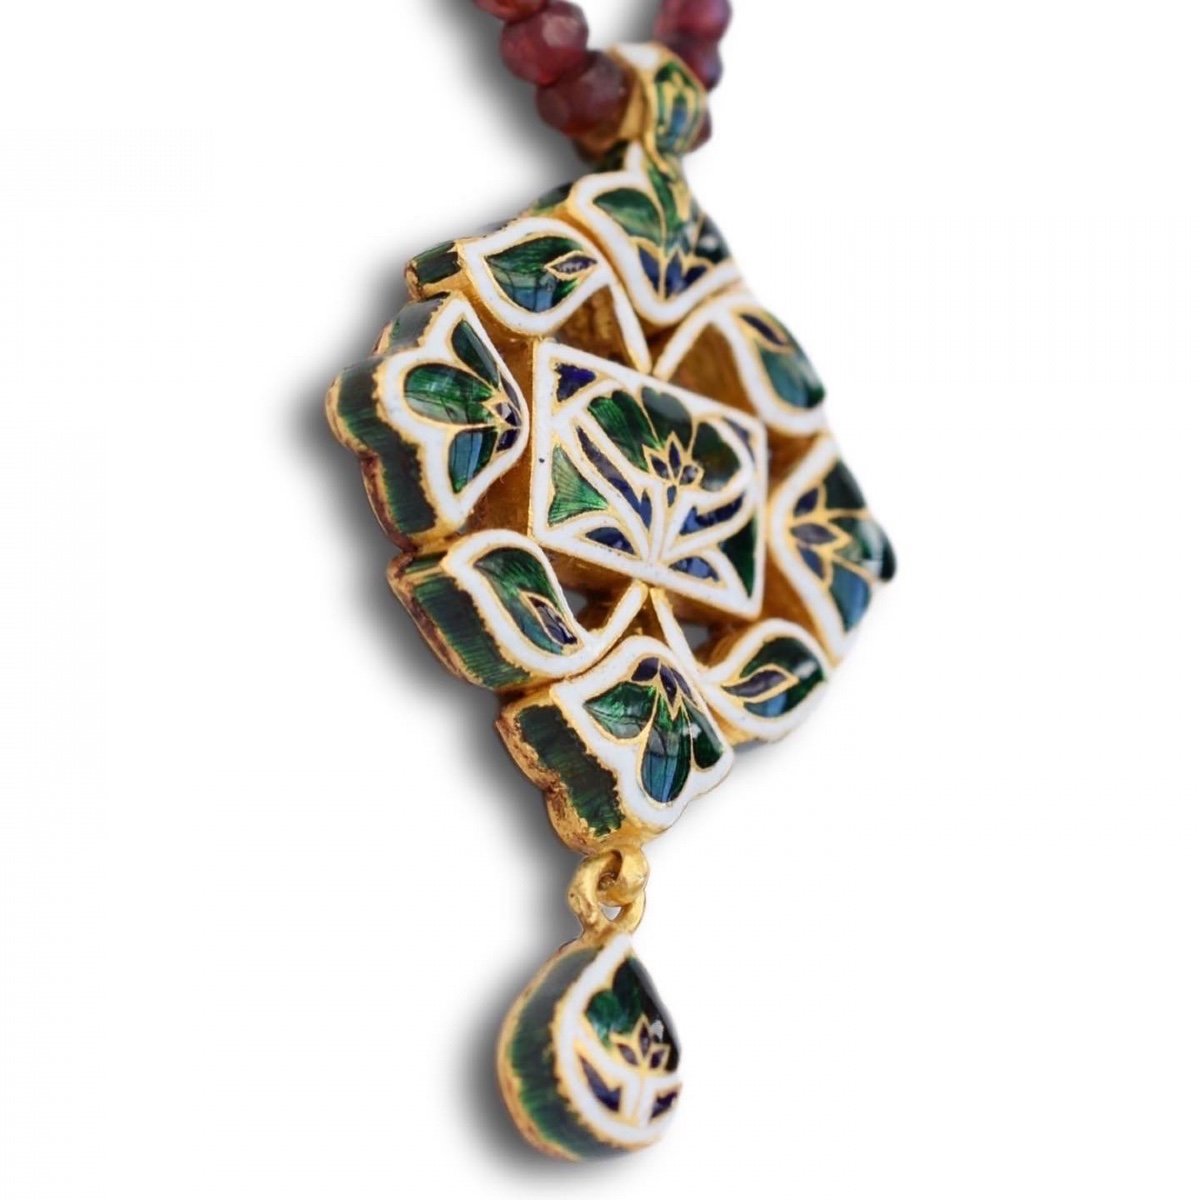 Enamel And Gold Pendant With Diamonds And A Table Cut Garnet. Indian, Circa 1900-photo-3